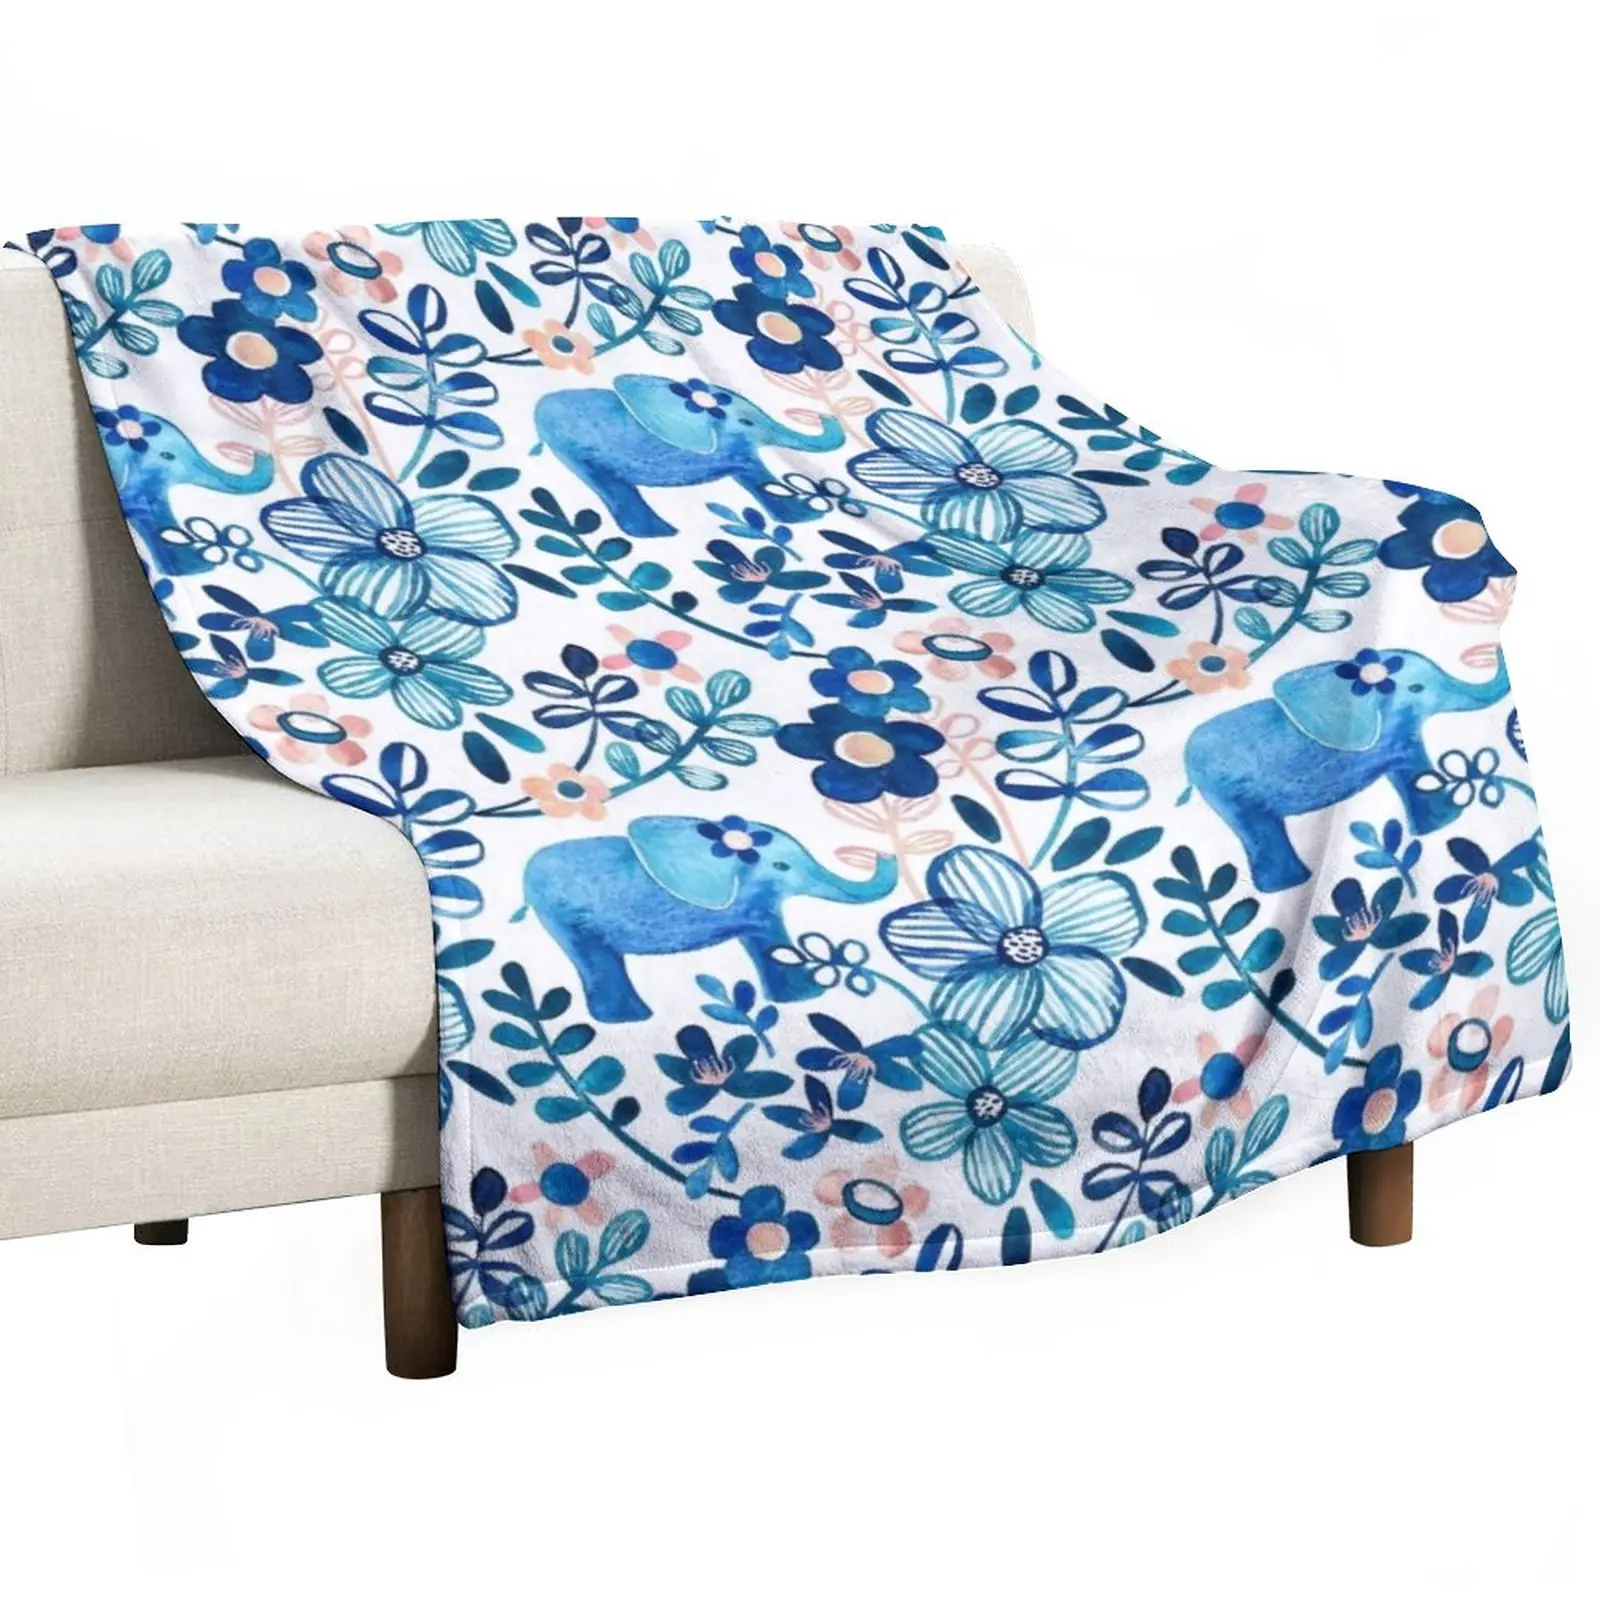 

Blush Pink, White and Blue Elephant and Floral Watercolor Pattern Throw Blanket Luxury Designer Blanket Sofa Blanket